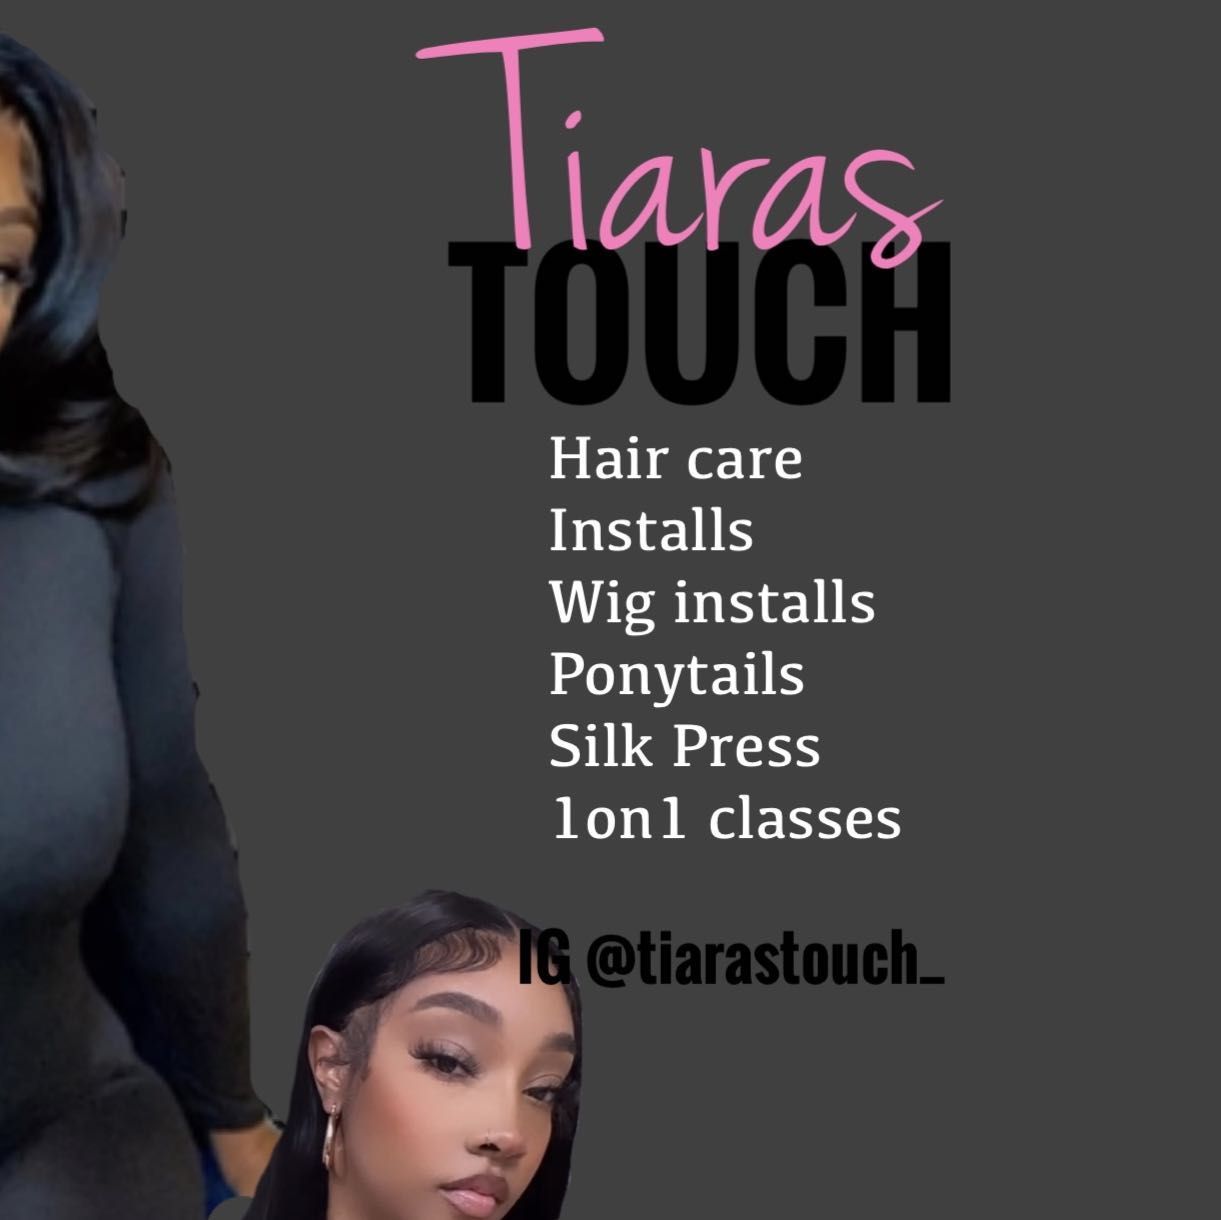 Tiara's Touch, 8853 woodyard rd Clinton MD, My Salon Suite, Clinton, 20735